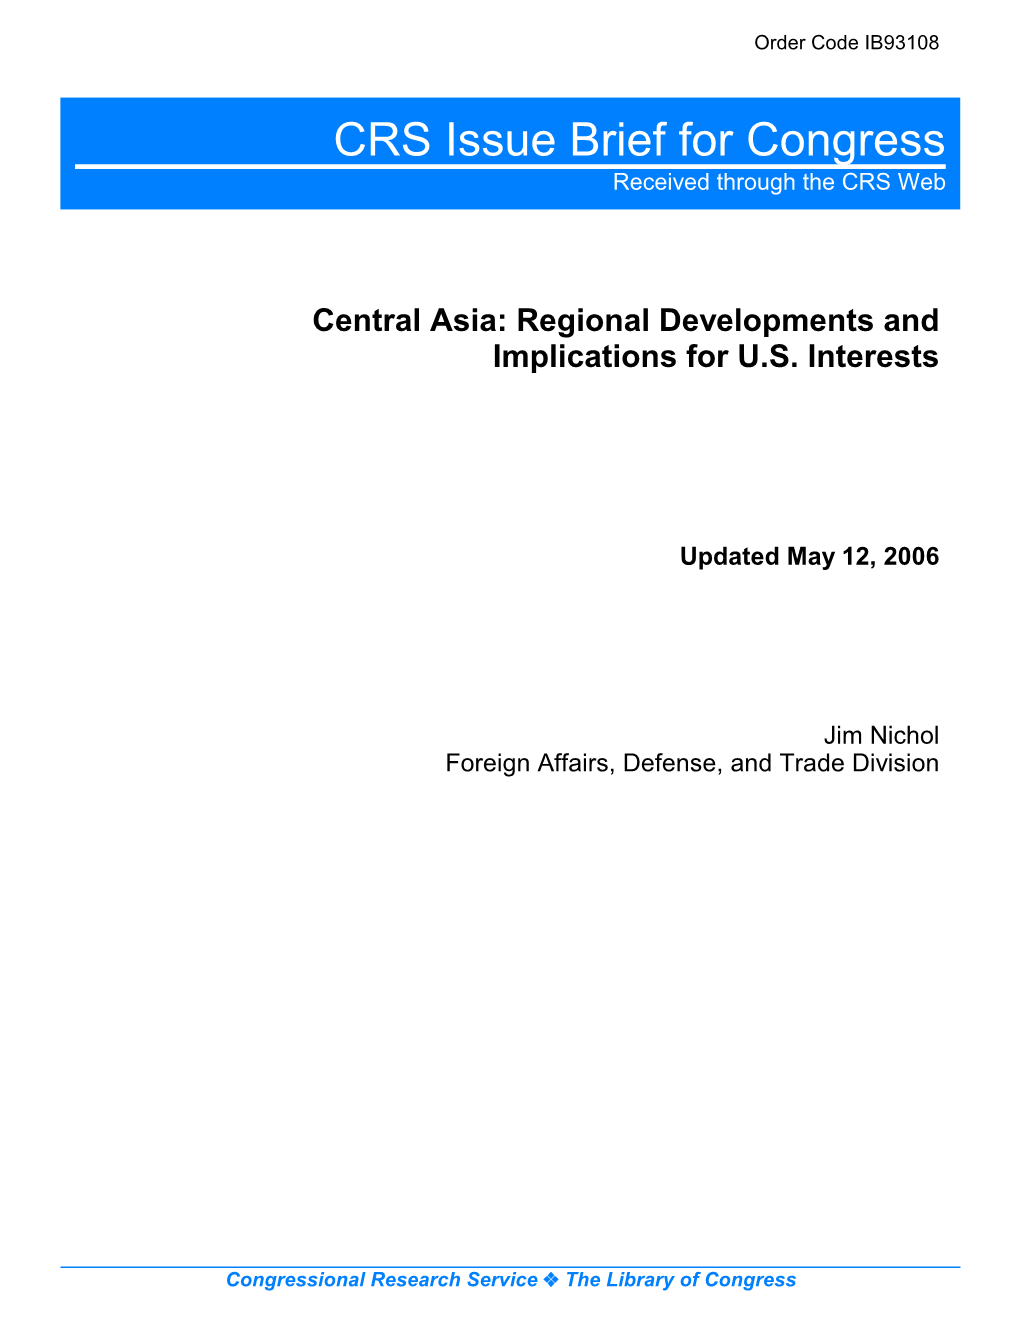 Central Asia: Regional Developments and Implications for U.S